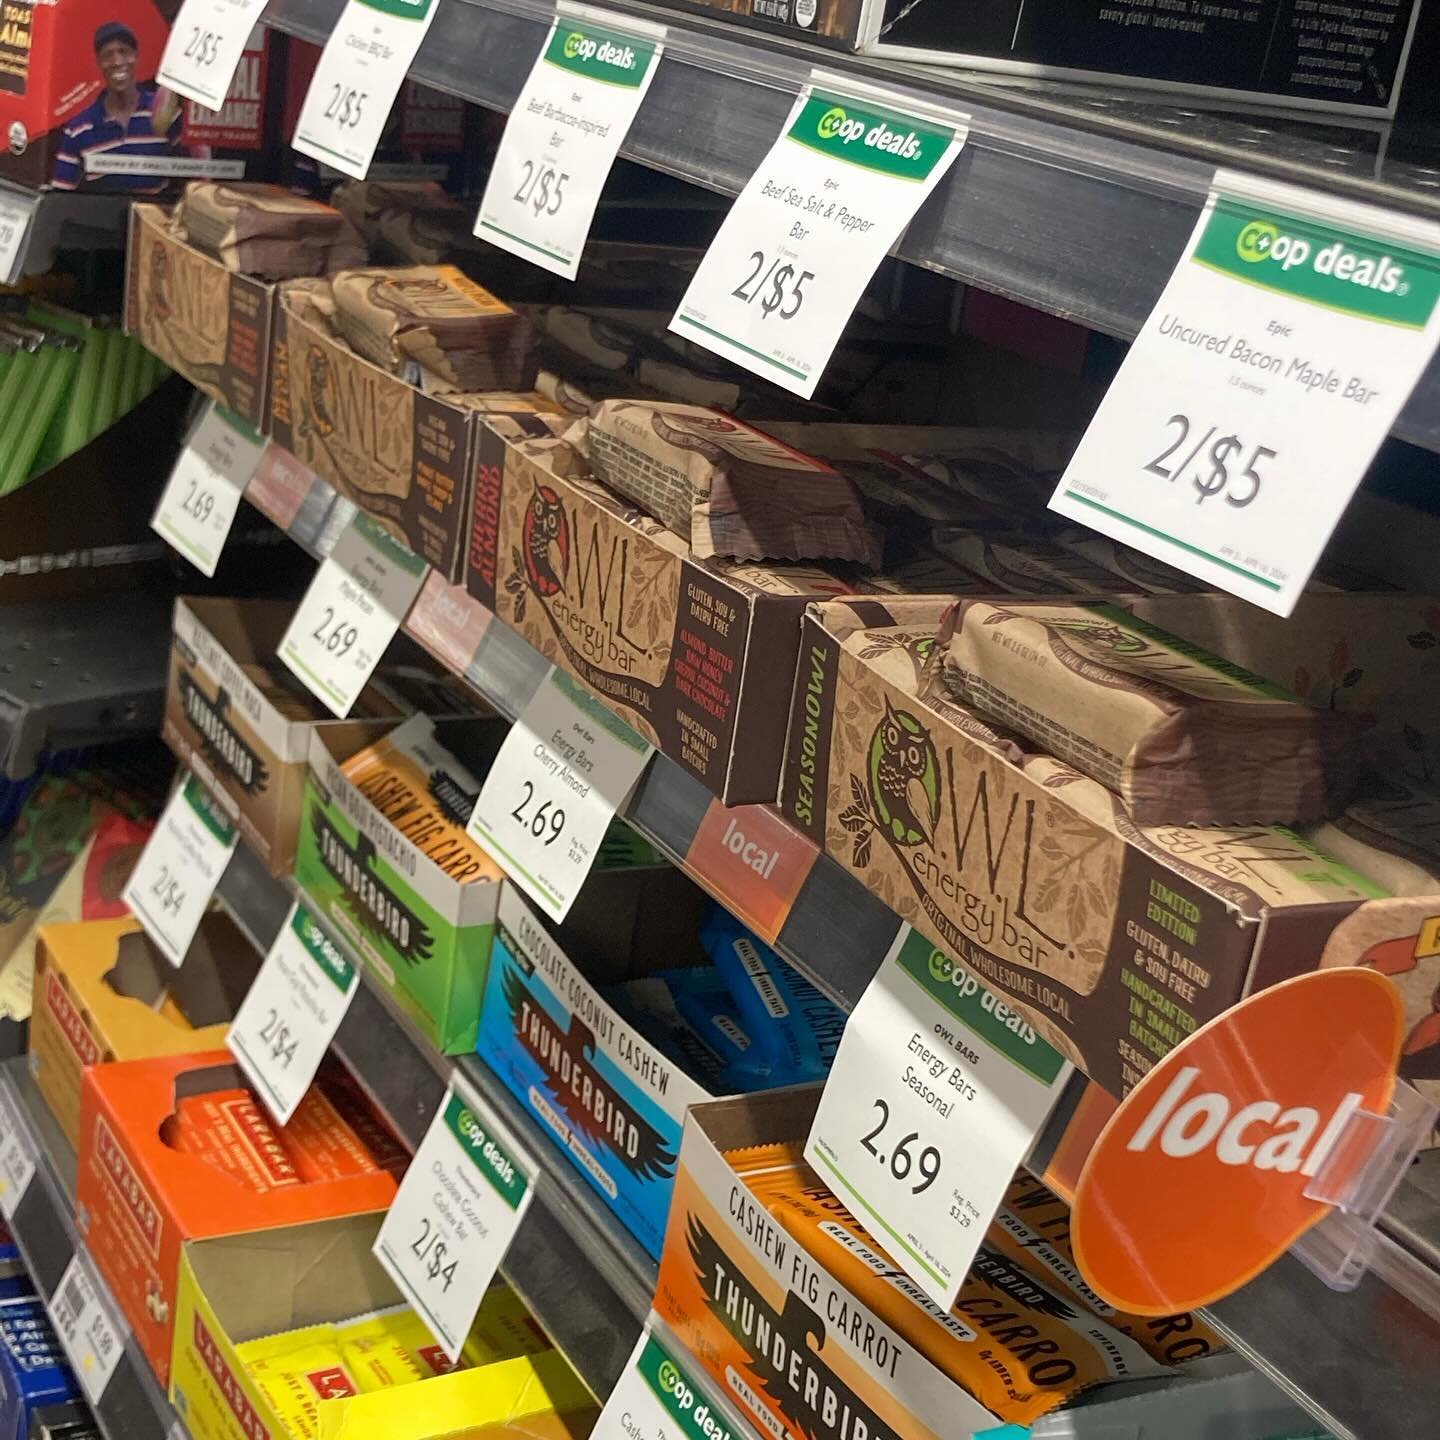 Everyone welcome @monadnockcoop ! OWL Energy Bars are on sale through March 16 for $2.69 a piece which we think is worth hooting about. Wonderful people of Cheshire county and Keene, NH come on down to your friendly neighborhood coop and stock up on 